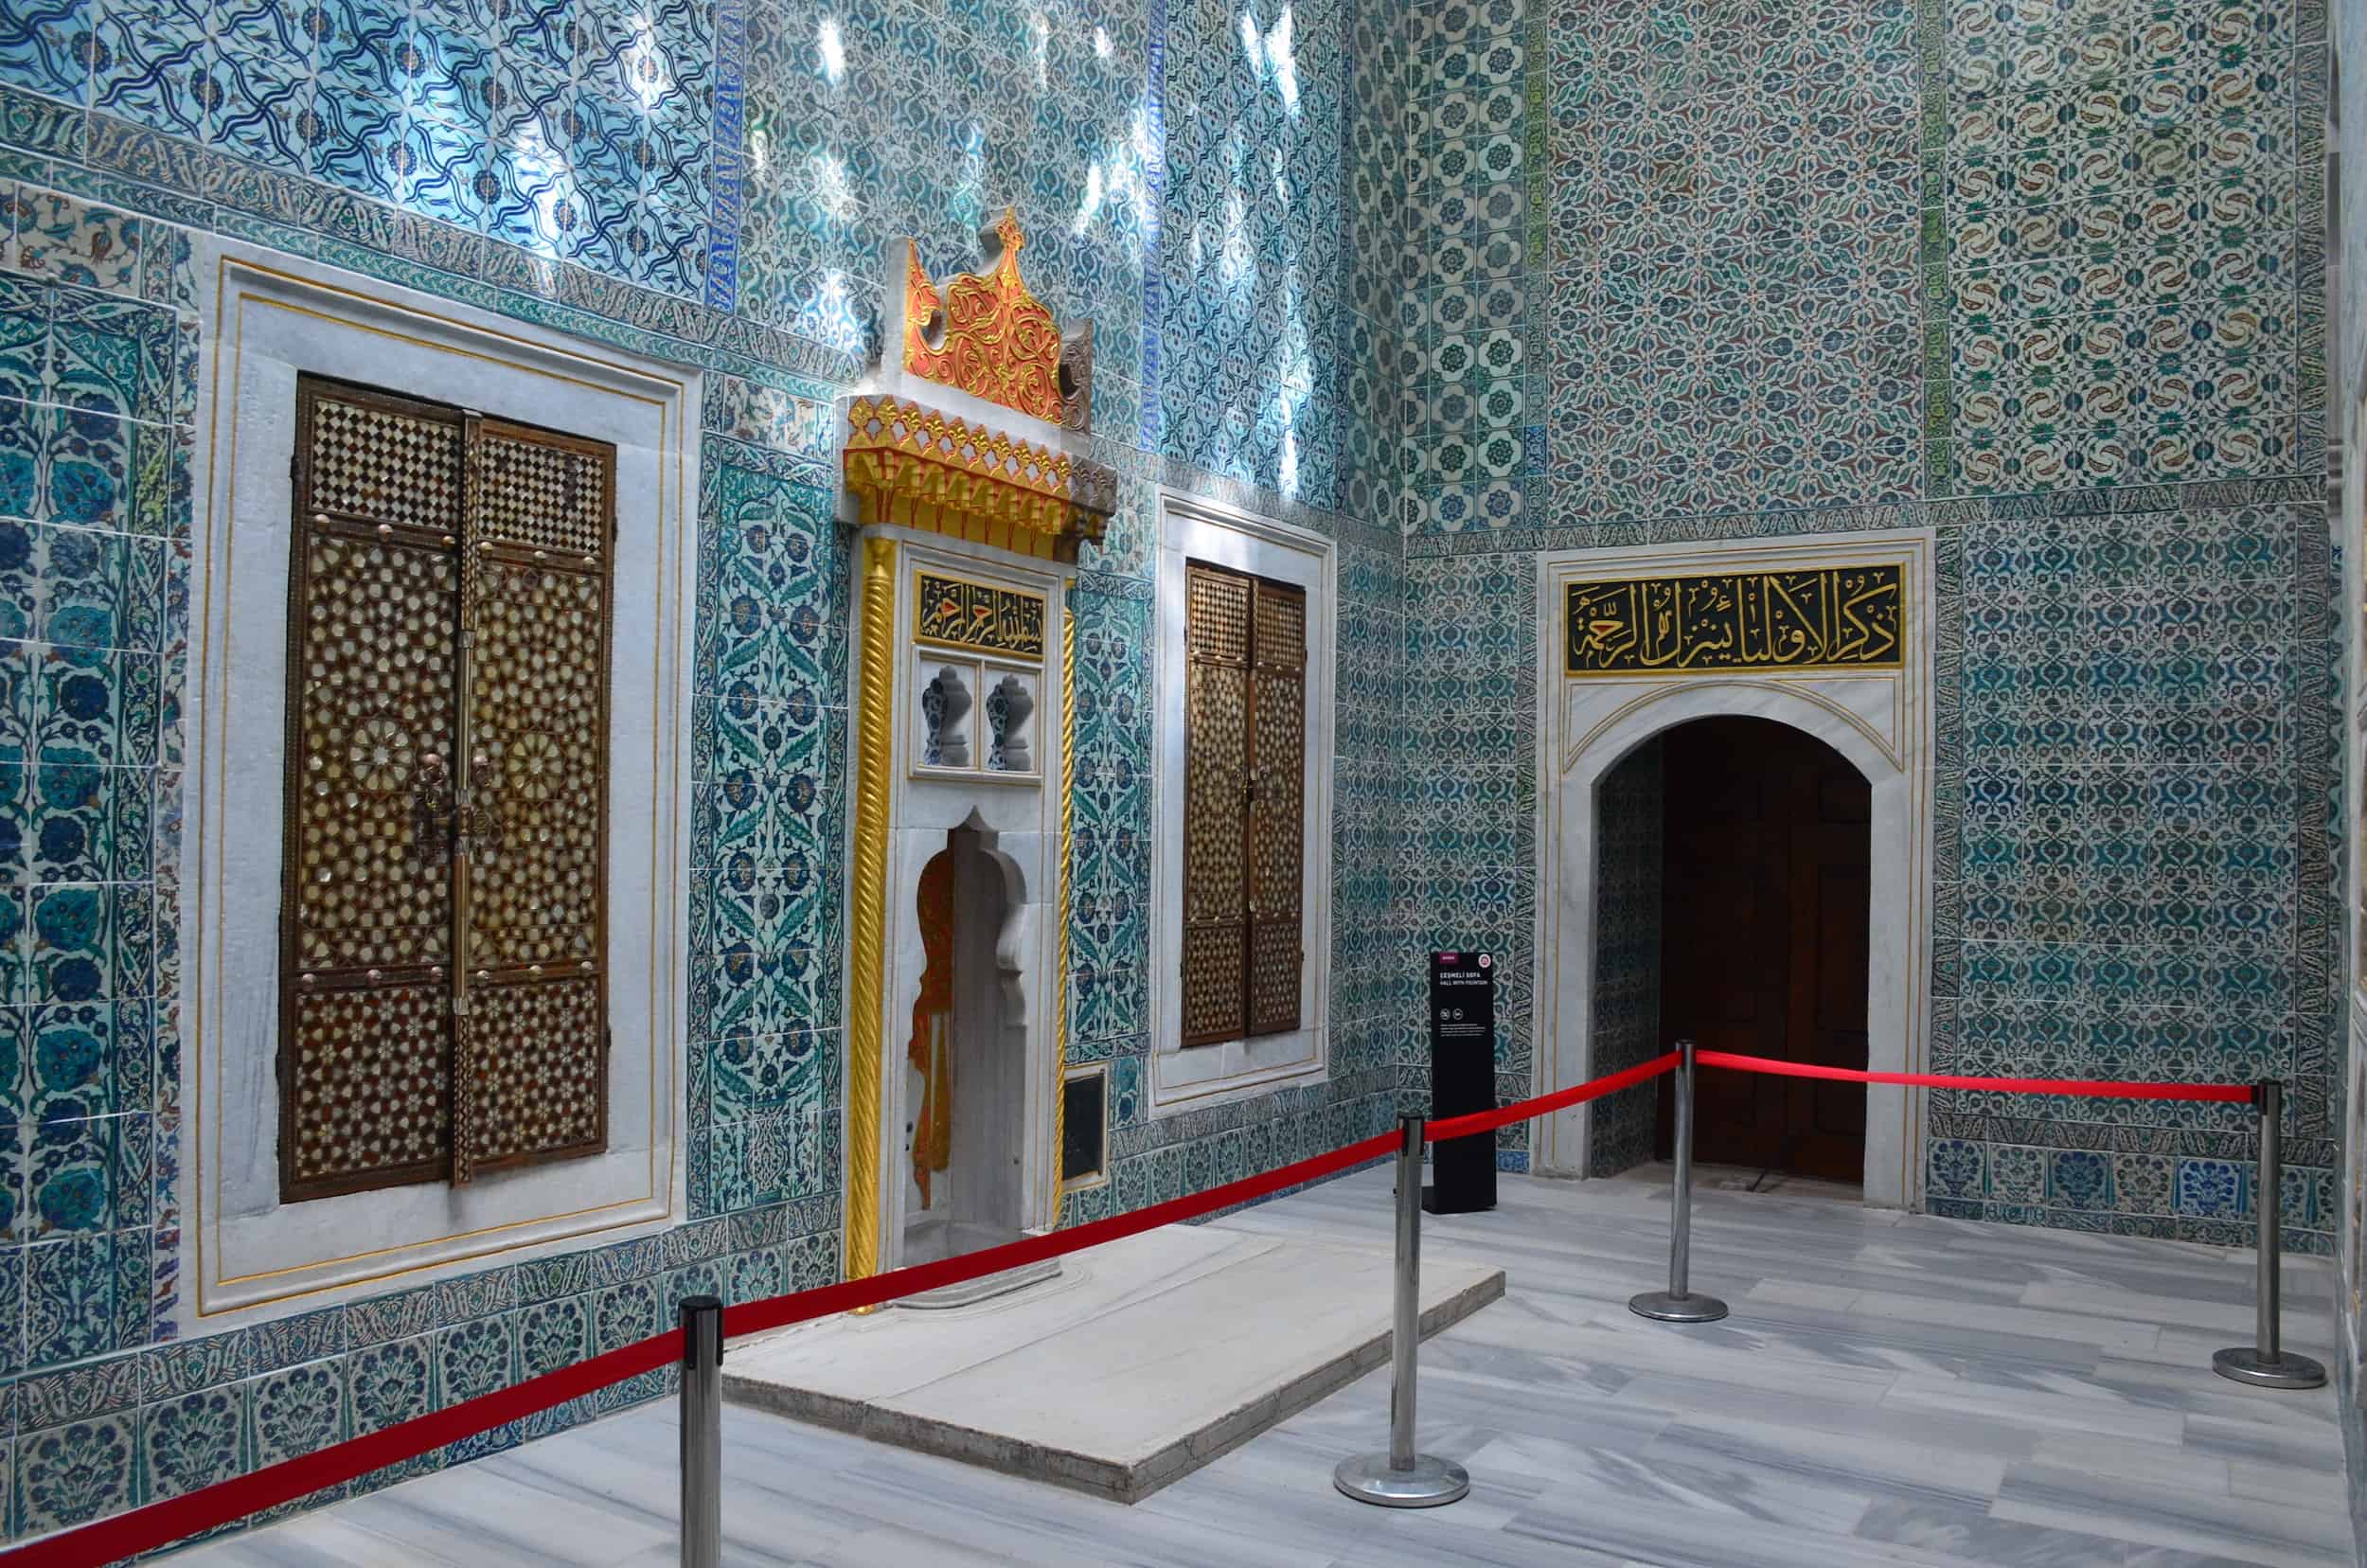 Hall with the Fountain in the Imperial Harem at Topkapi Palace in Istanbul, Turkey